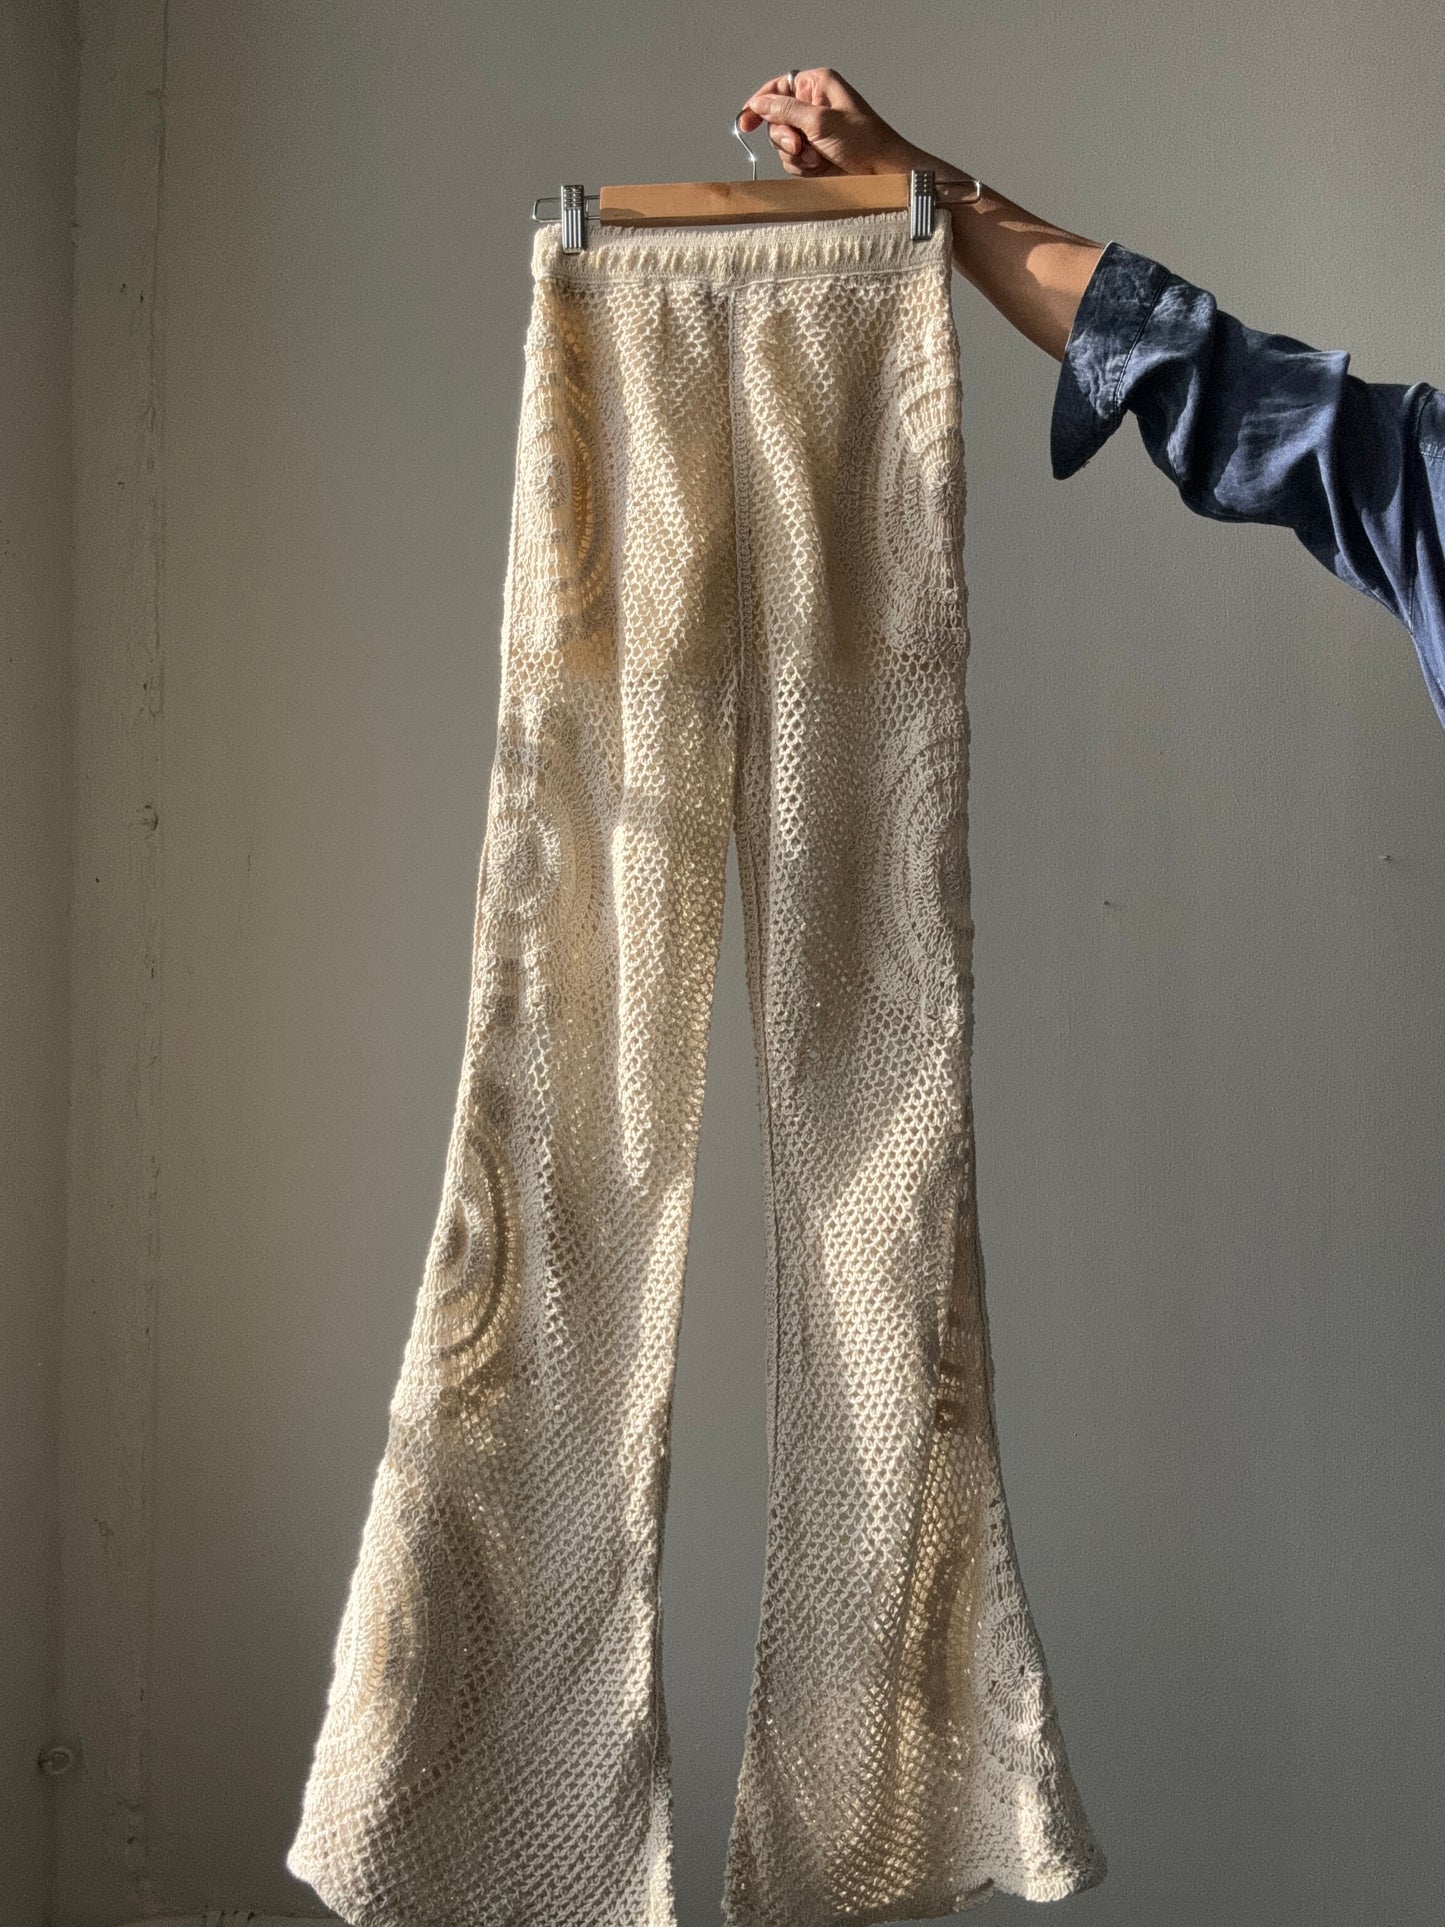 Erin Cotton Crochet Knit Pants In Natural